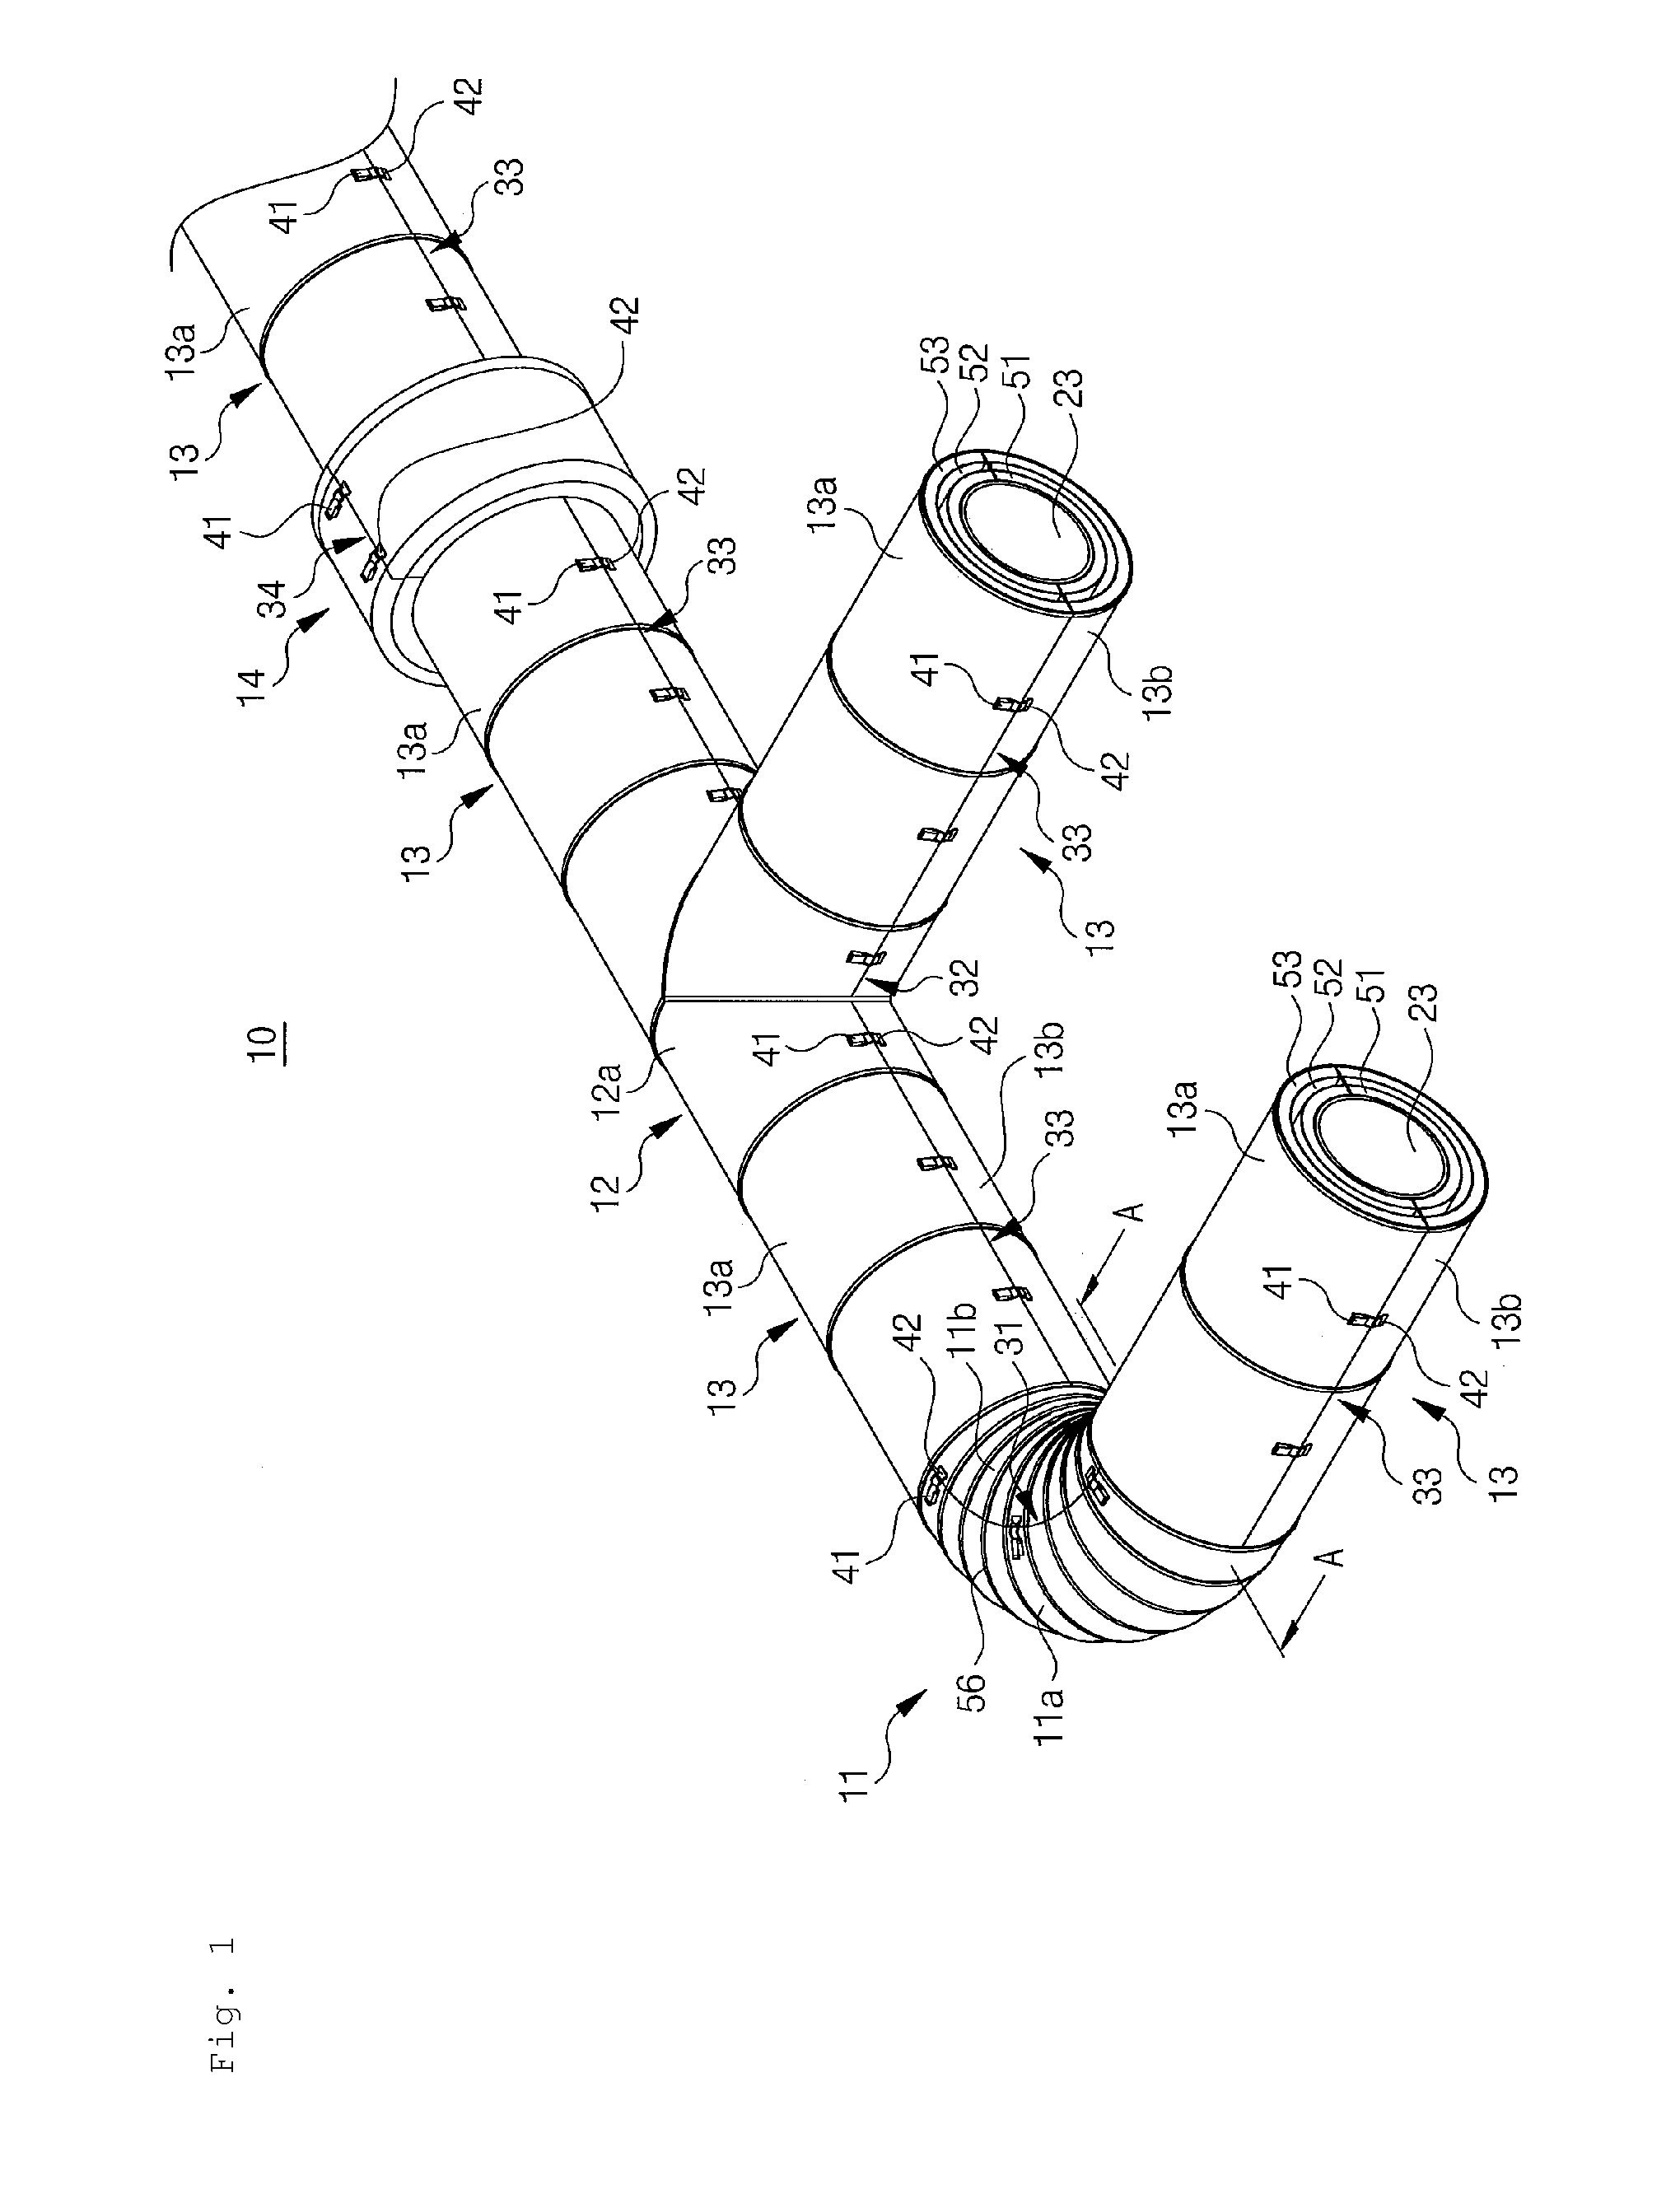 Pipe insulation apparatus having finishing cover of compression-bonded structure